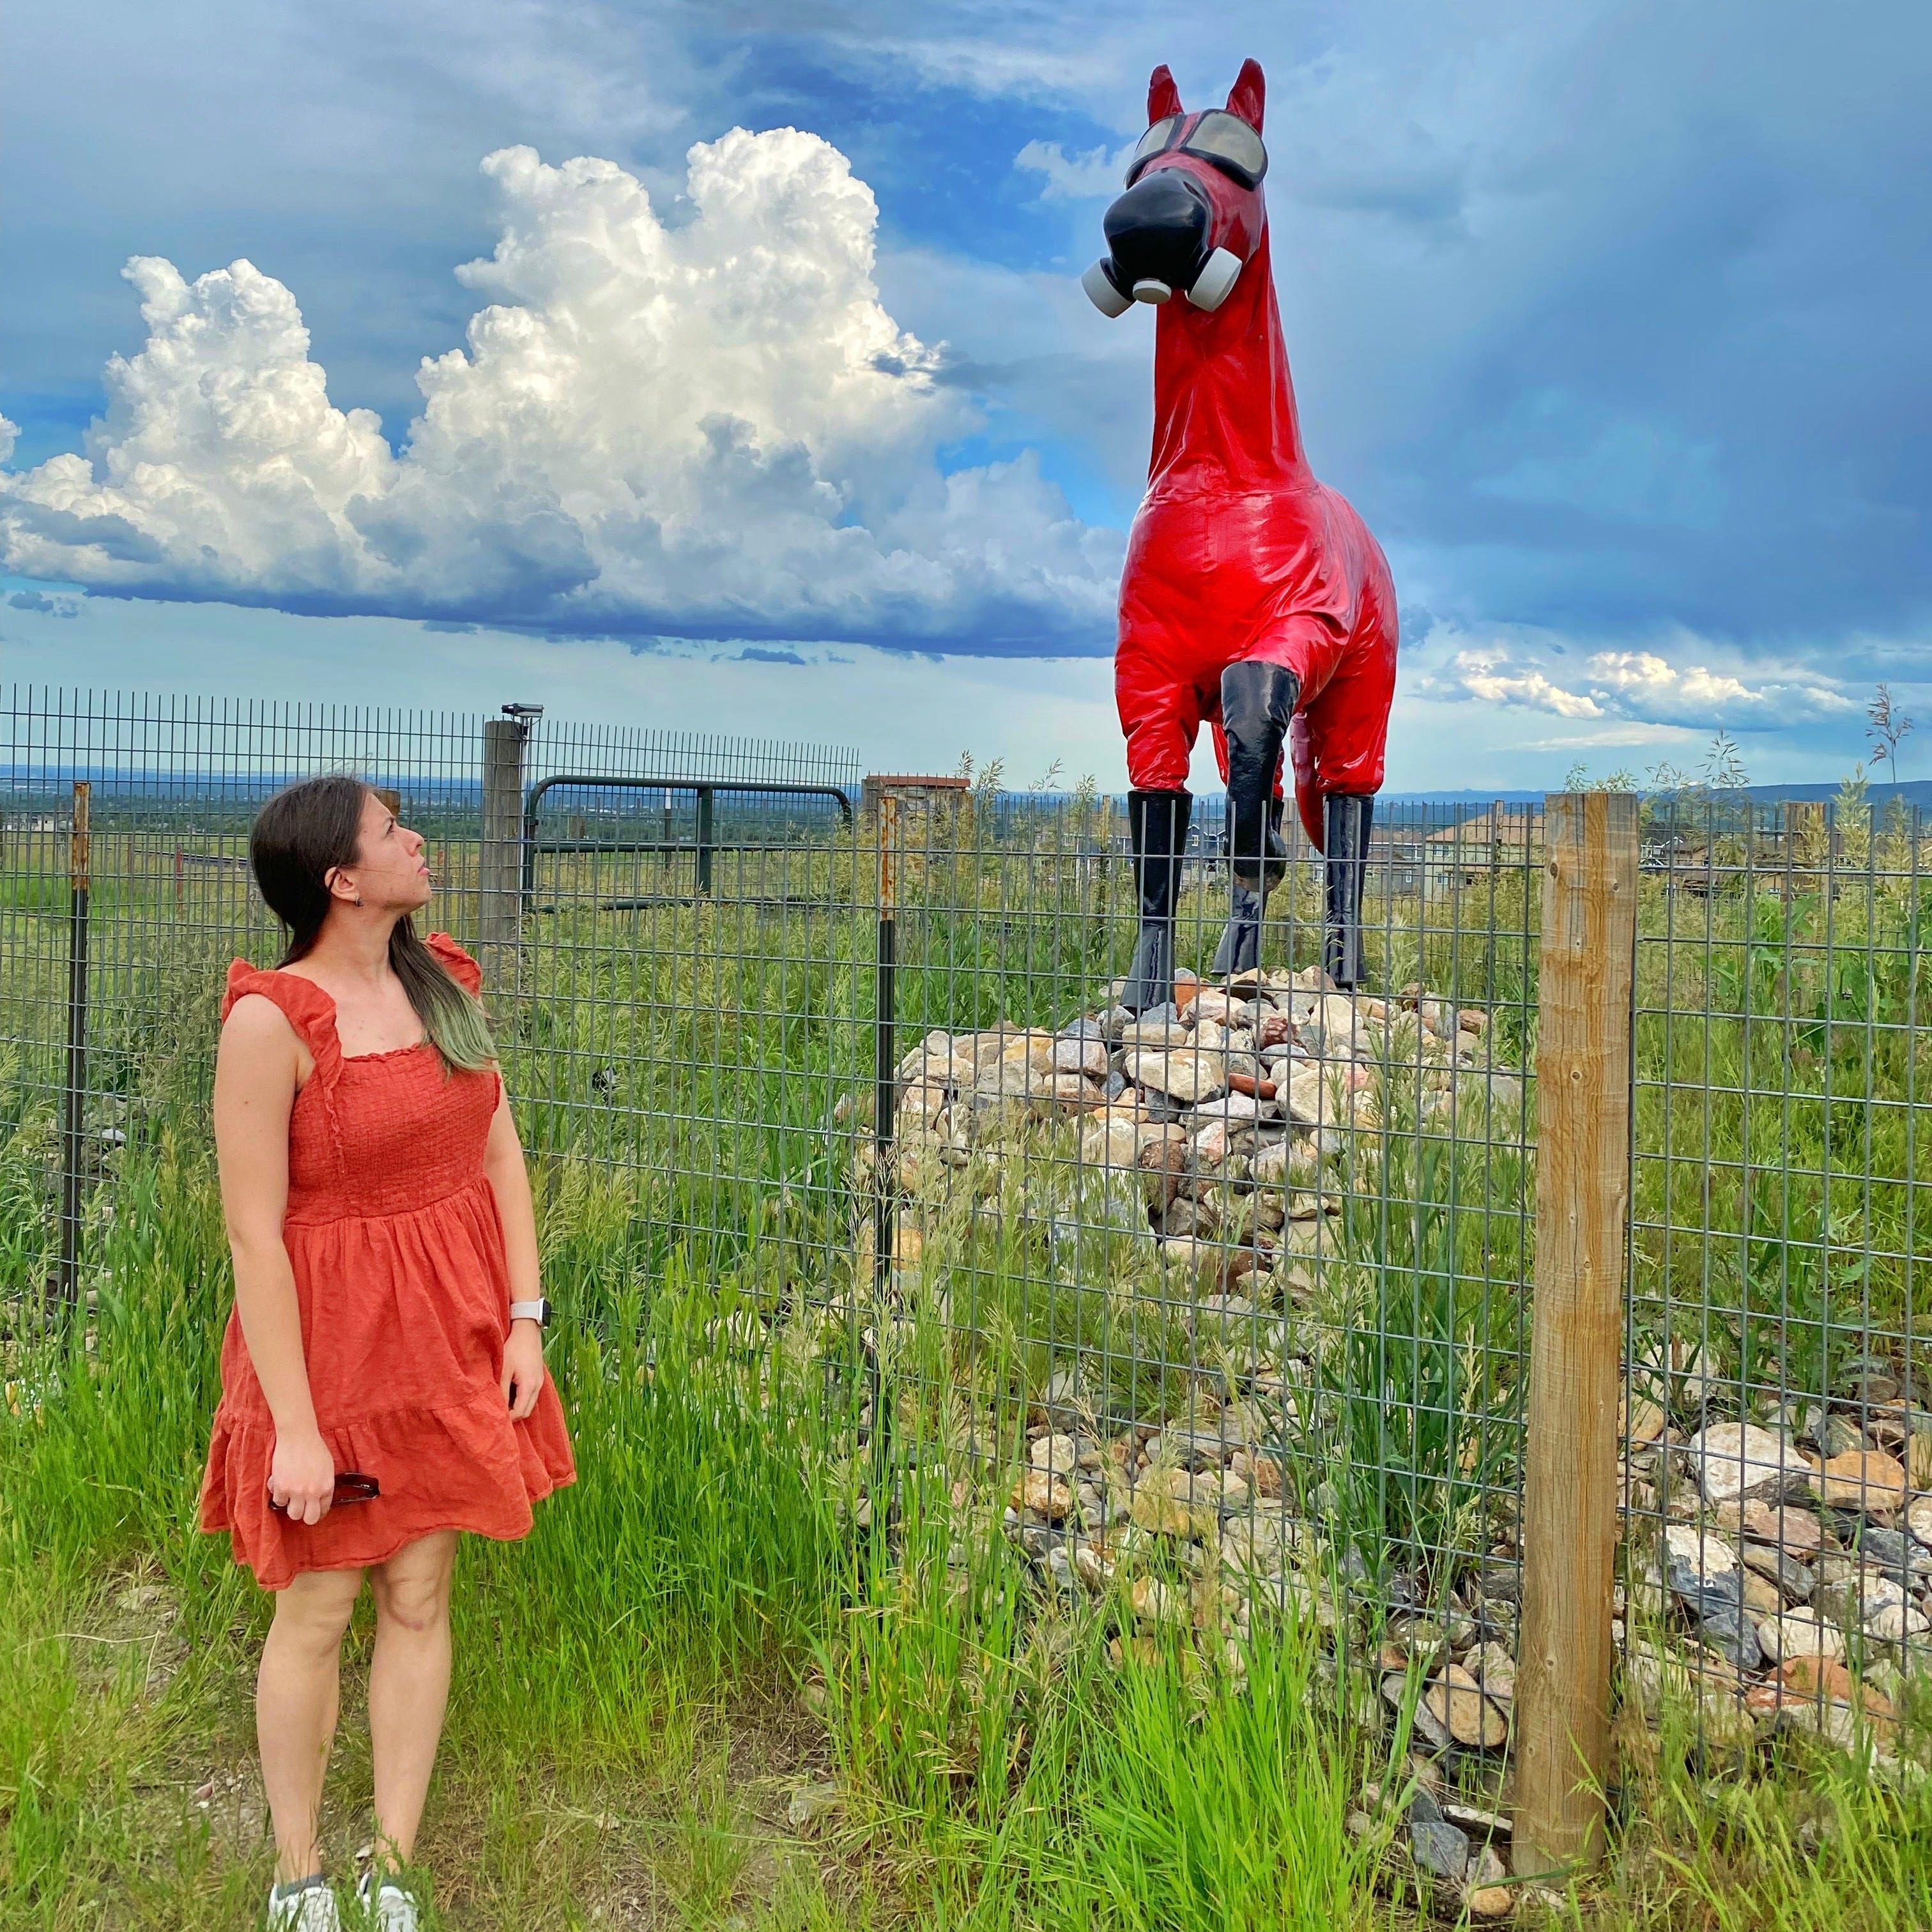 A photo of Mariya Delano in a bright green field staring up at a statue of a horse in red gas mask and suit.